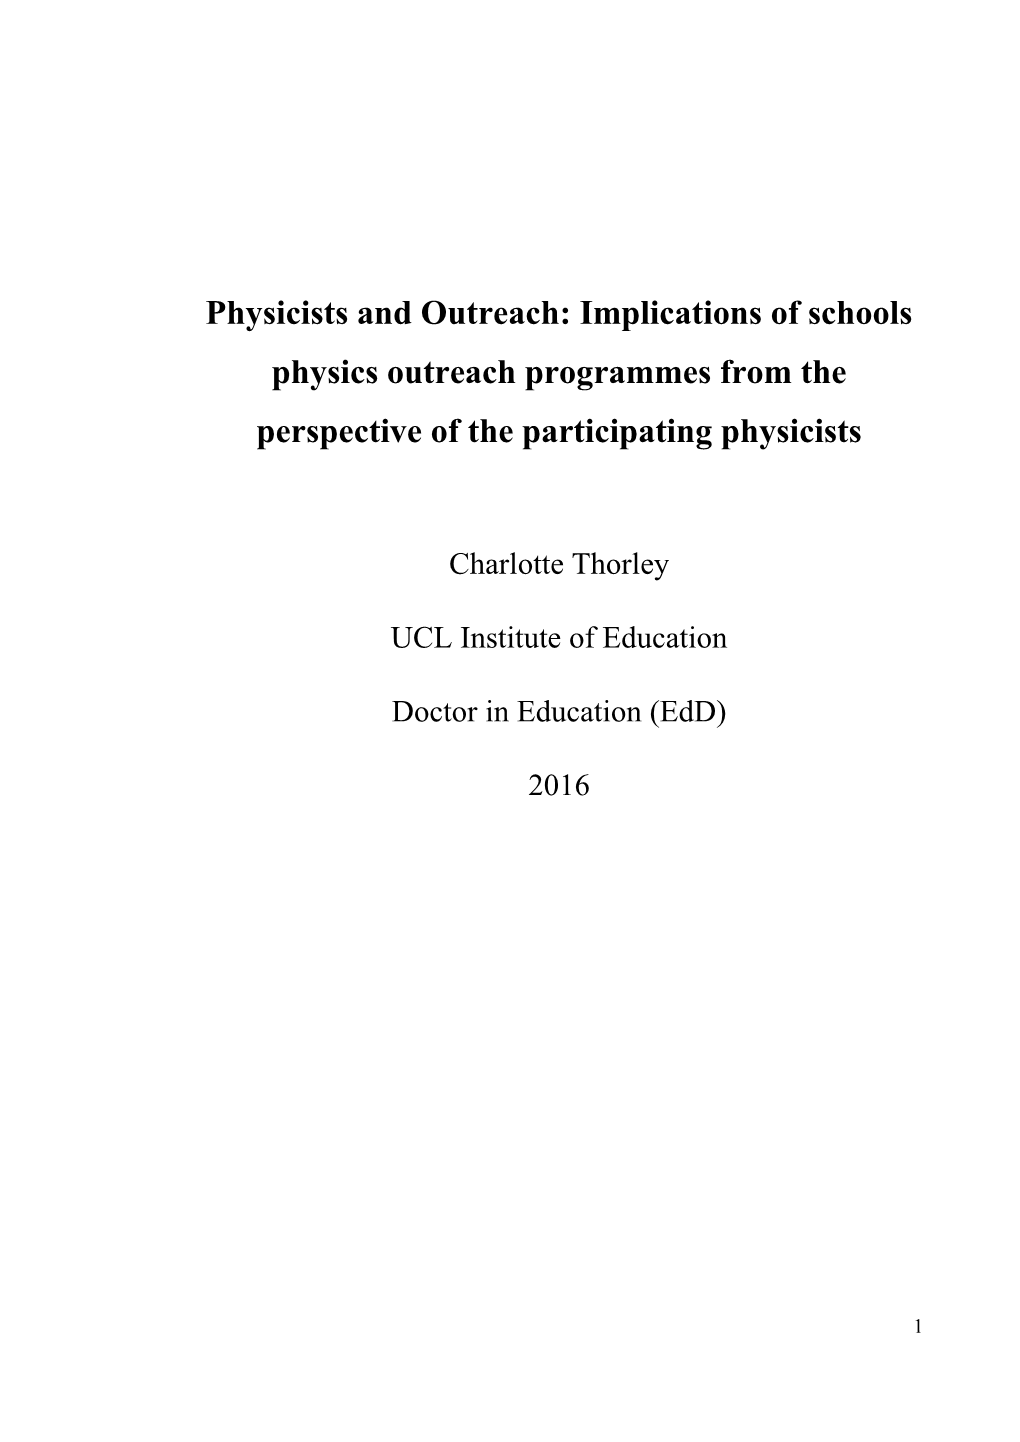 Physicists and Outreach: Implications of Schools Physics Outreach Programmes from the Perspective of the Participating Physicists